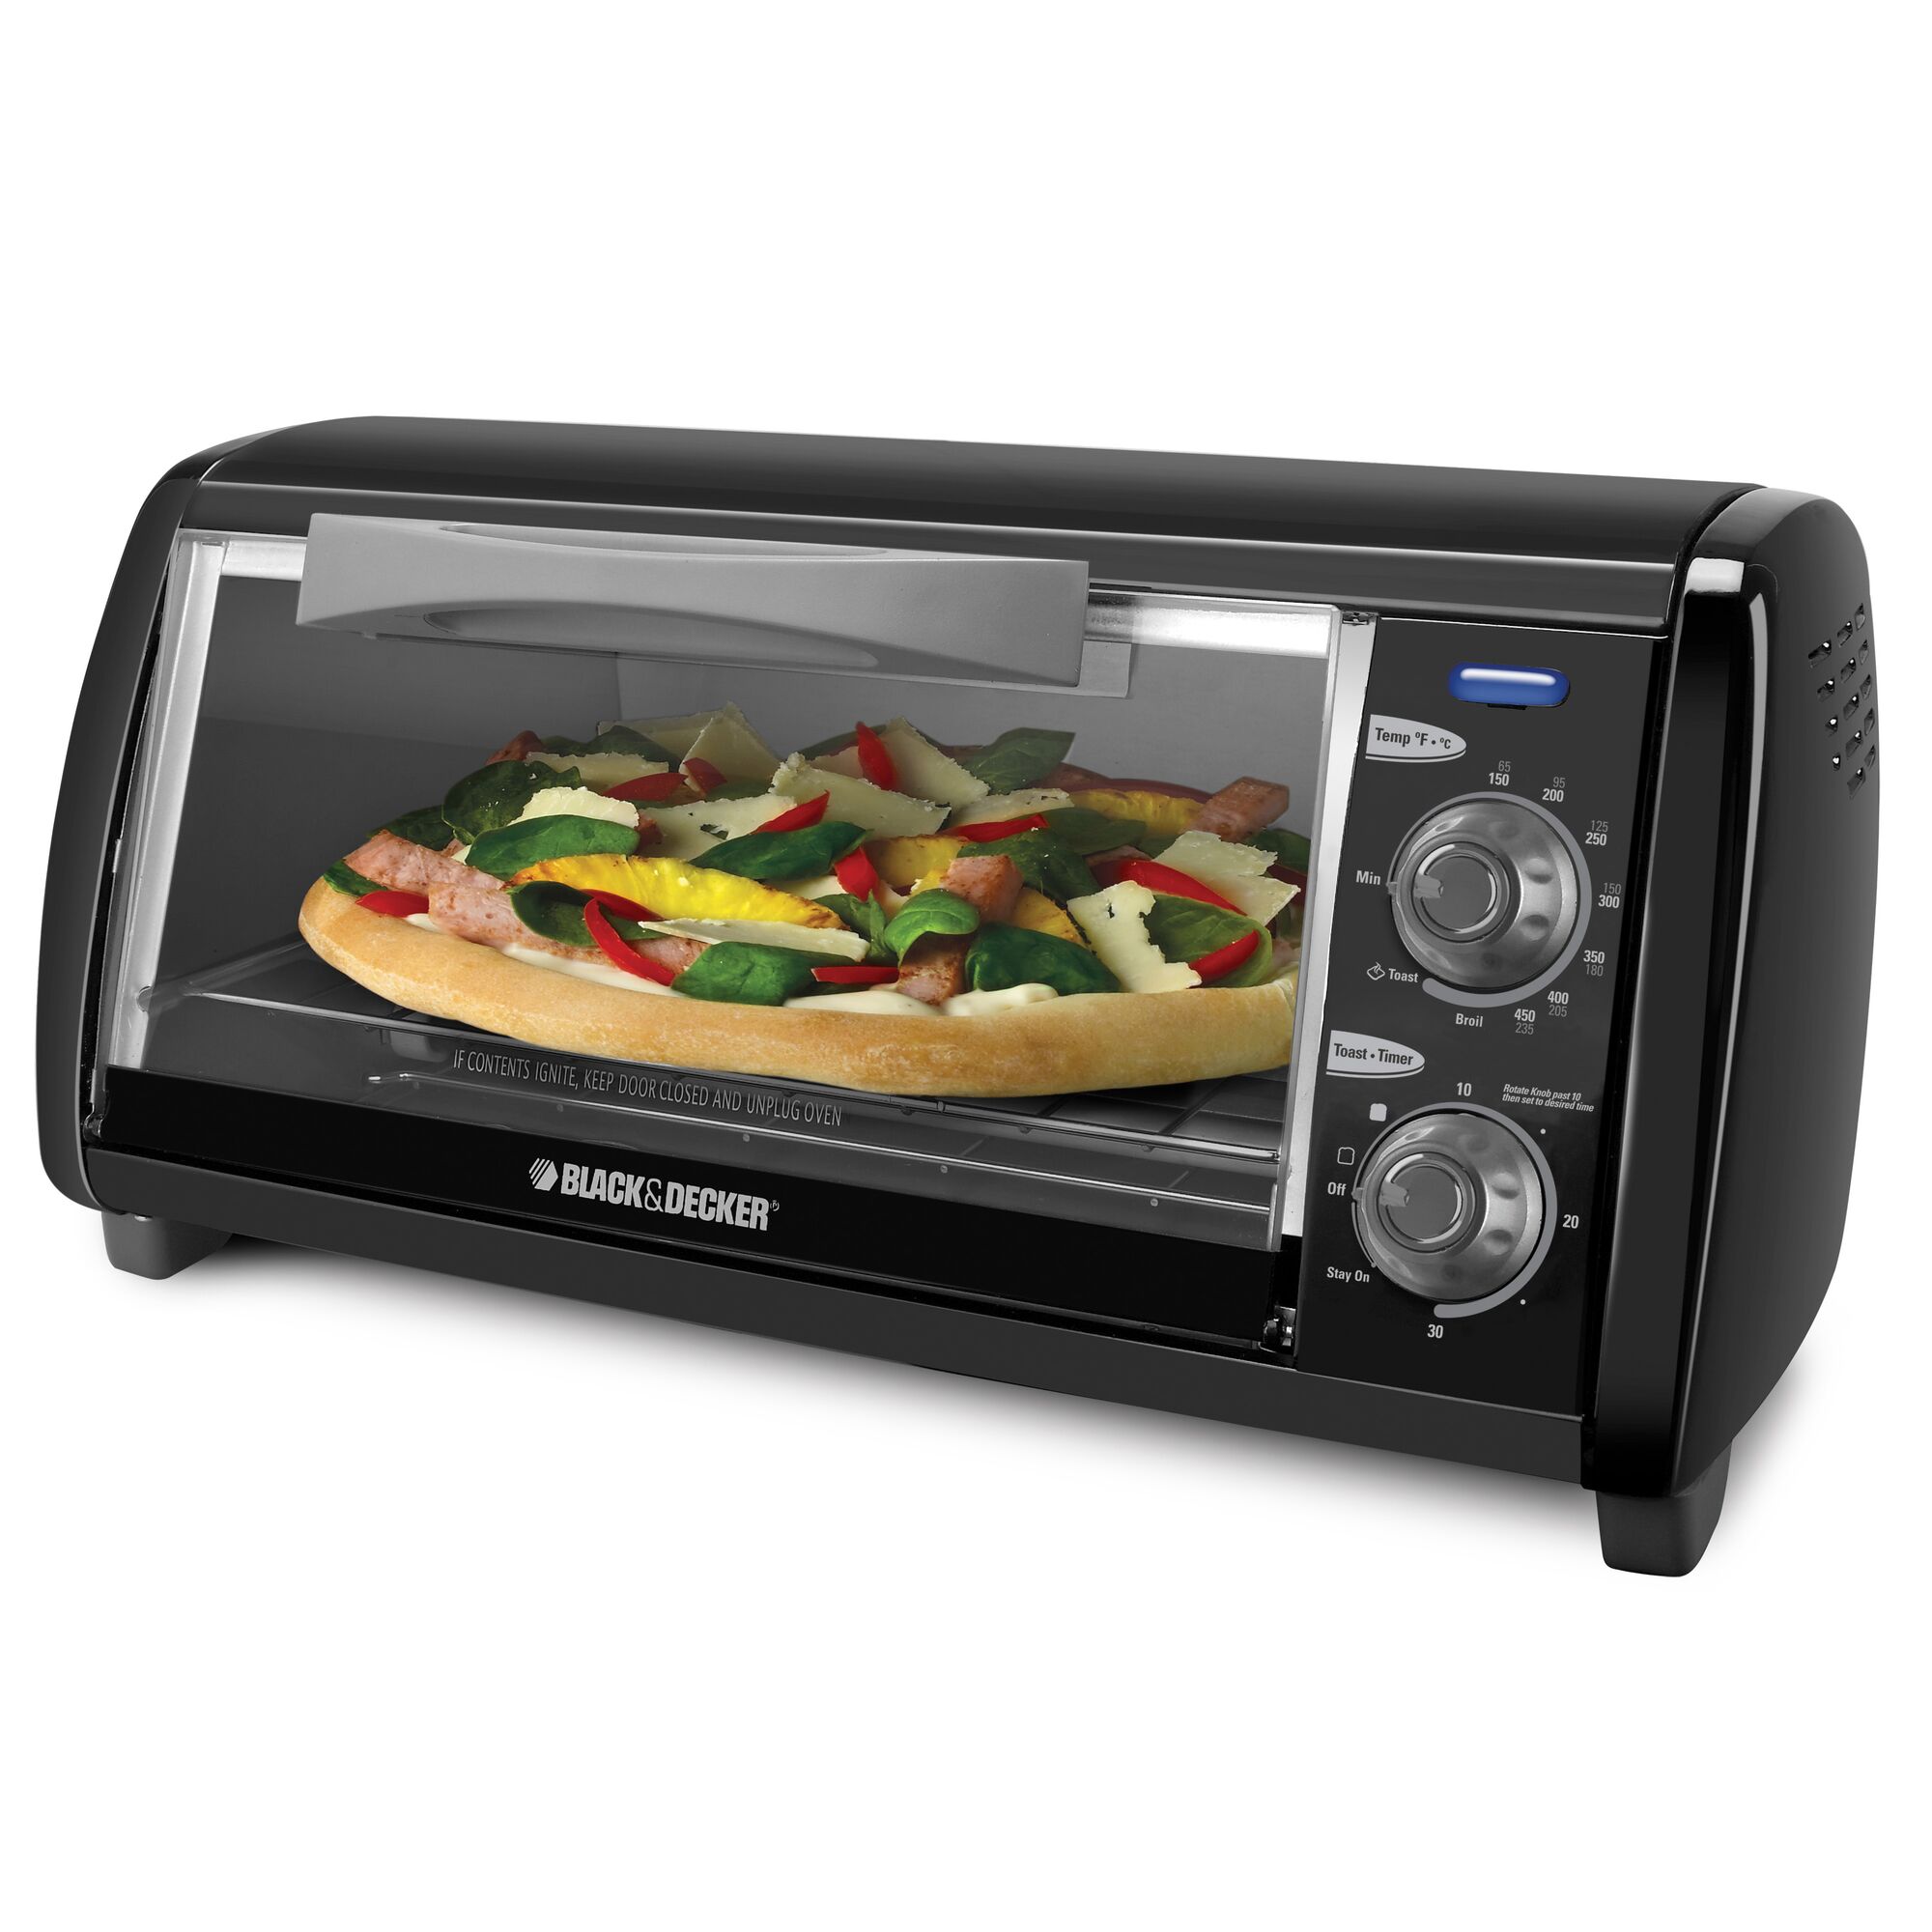 Profile of countertop toaster oven.